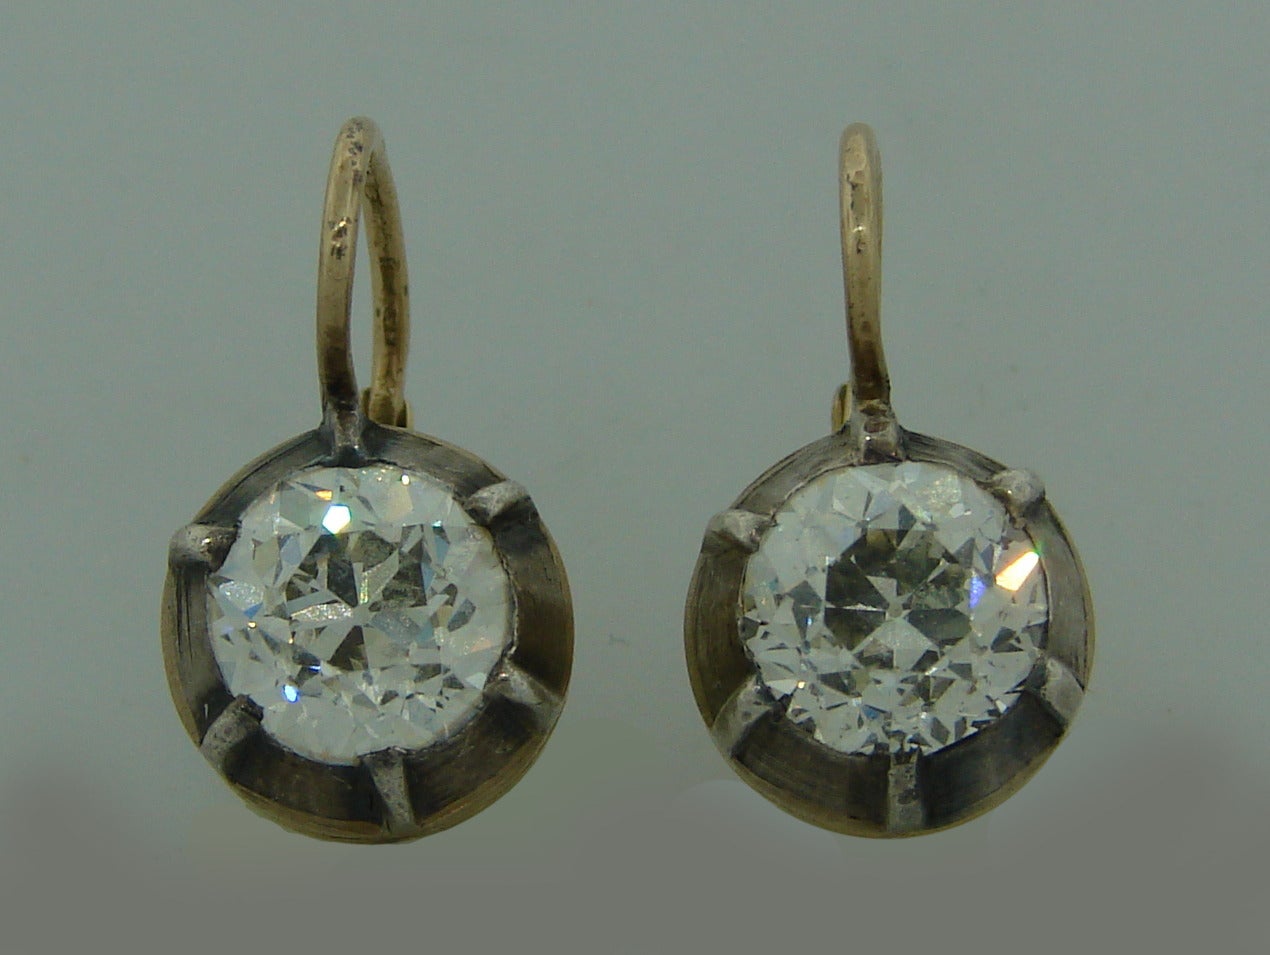 Gorgeous Victorian drop earrings featuring two Old European cut diamonds approximately 1.45 carat each. The diamonds are set in silver and 14k (tested) yellow gold. The diamonds are G color and VS2/SI1 clarity according GIA diamond grading system.